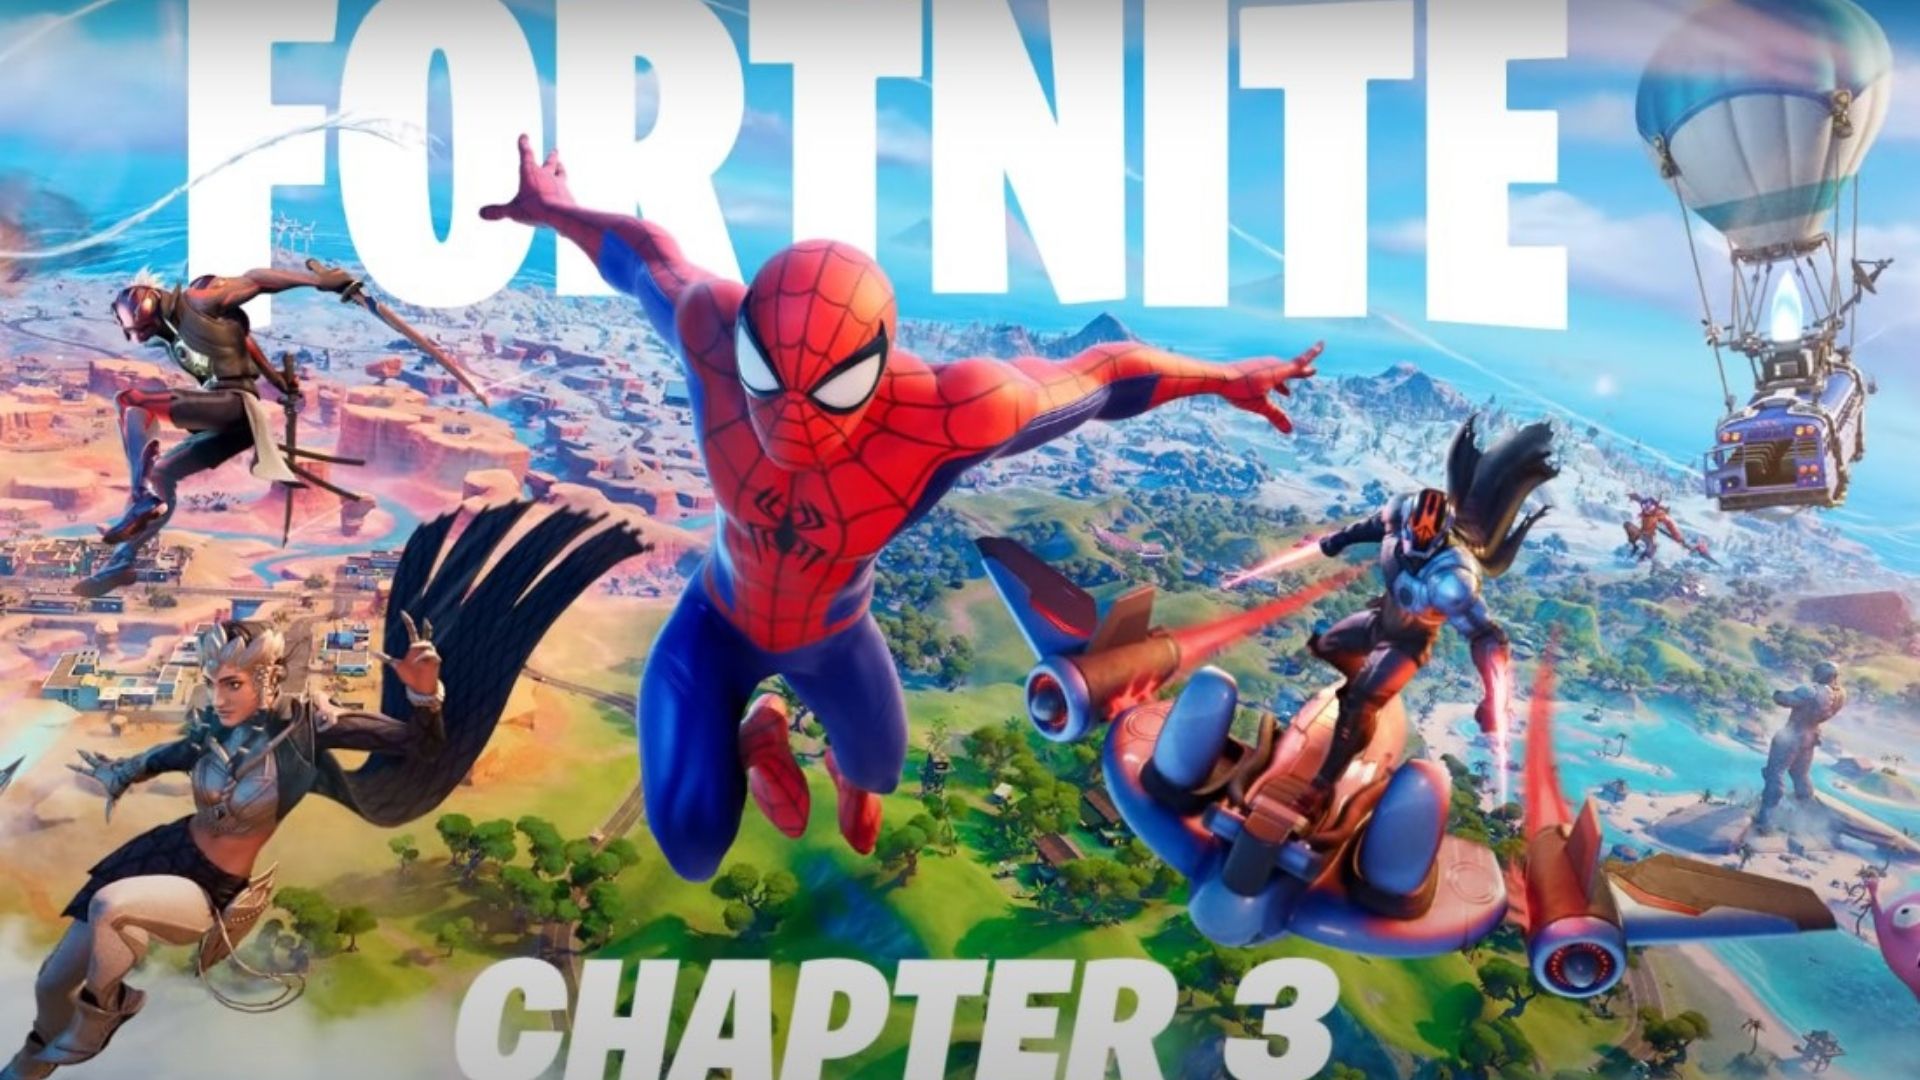 Fortnite chapter 3: One Week Review and updates